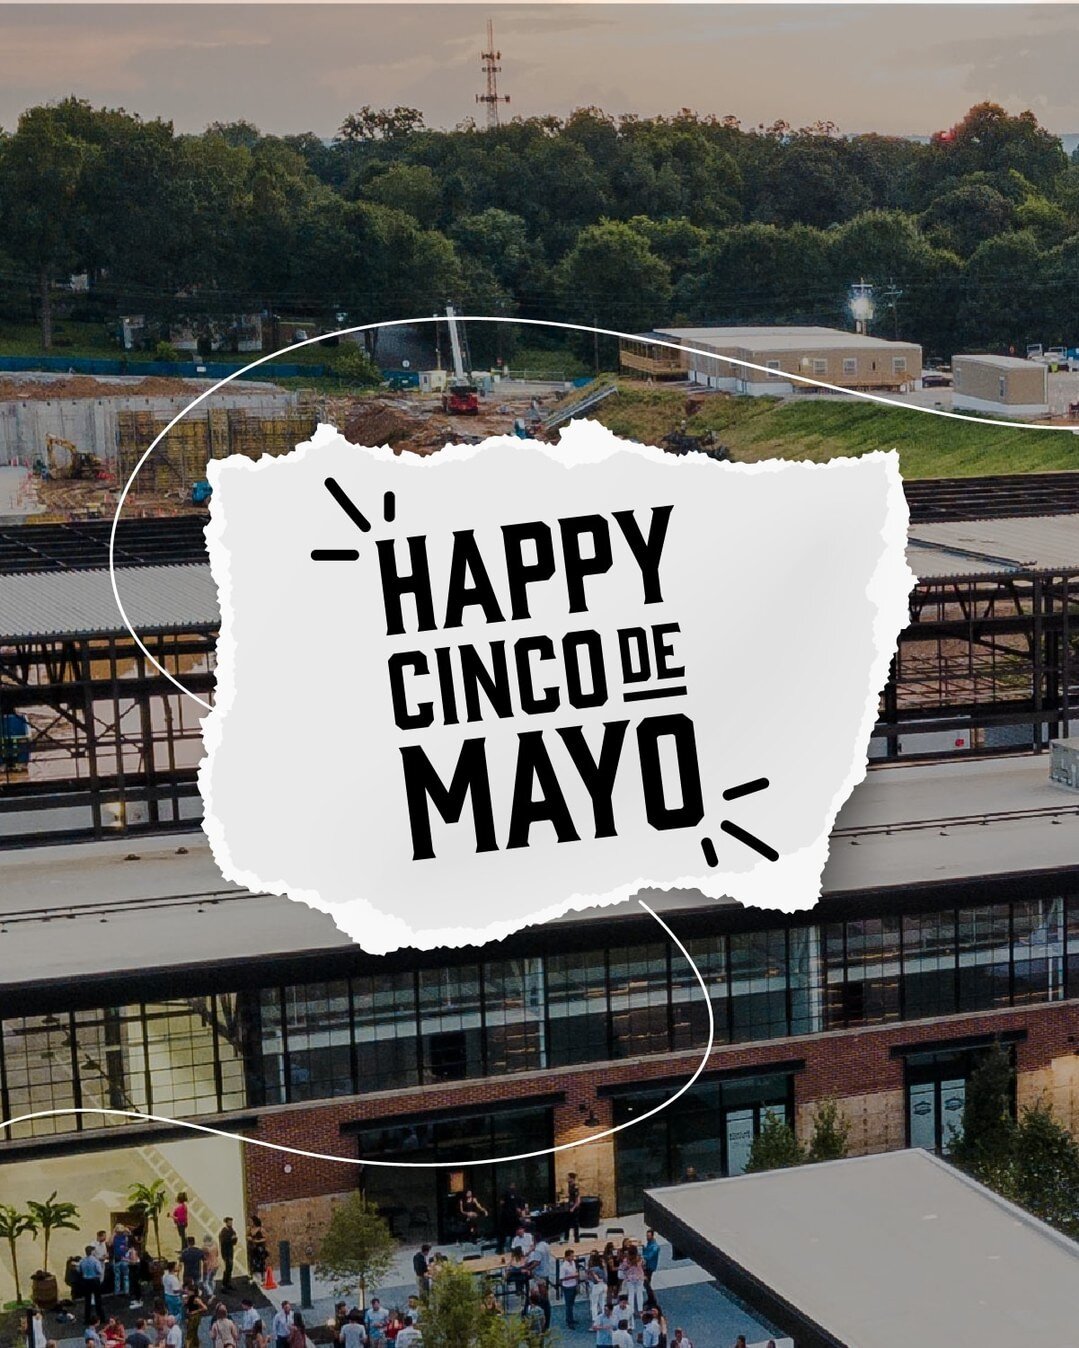 On this Cinco de Mayo, we want to celebrate the vibrancy and richness of Mexican-American culture in our community! We're especially excited about the soon-to-open @ancestralbottleshop and @elsantogallo, two incredible Mexican-American-owned business